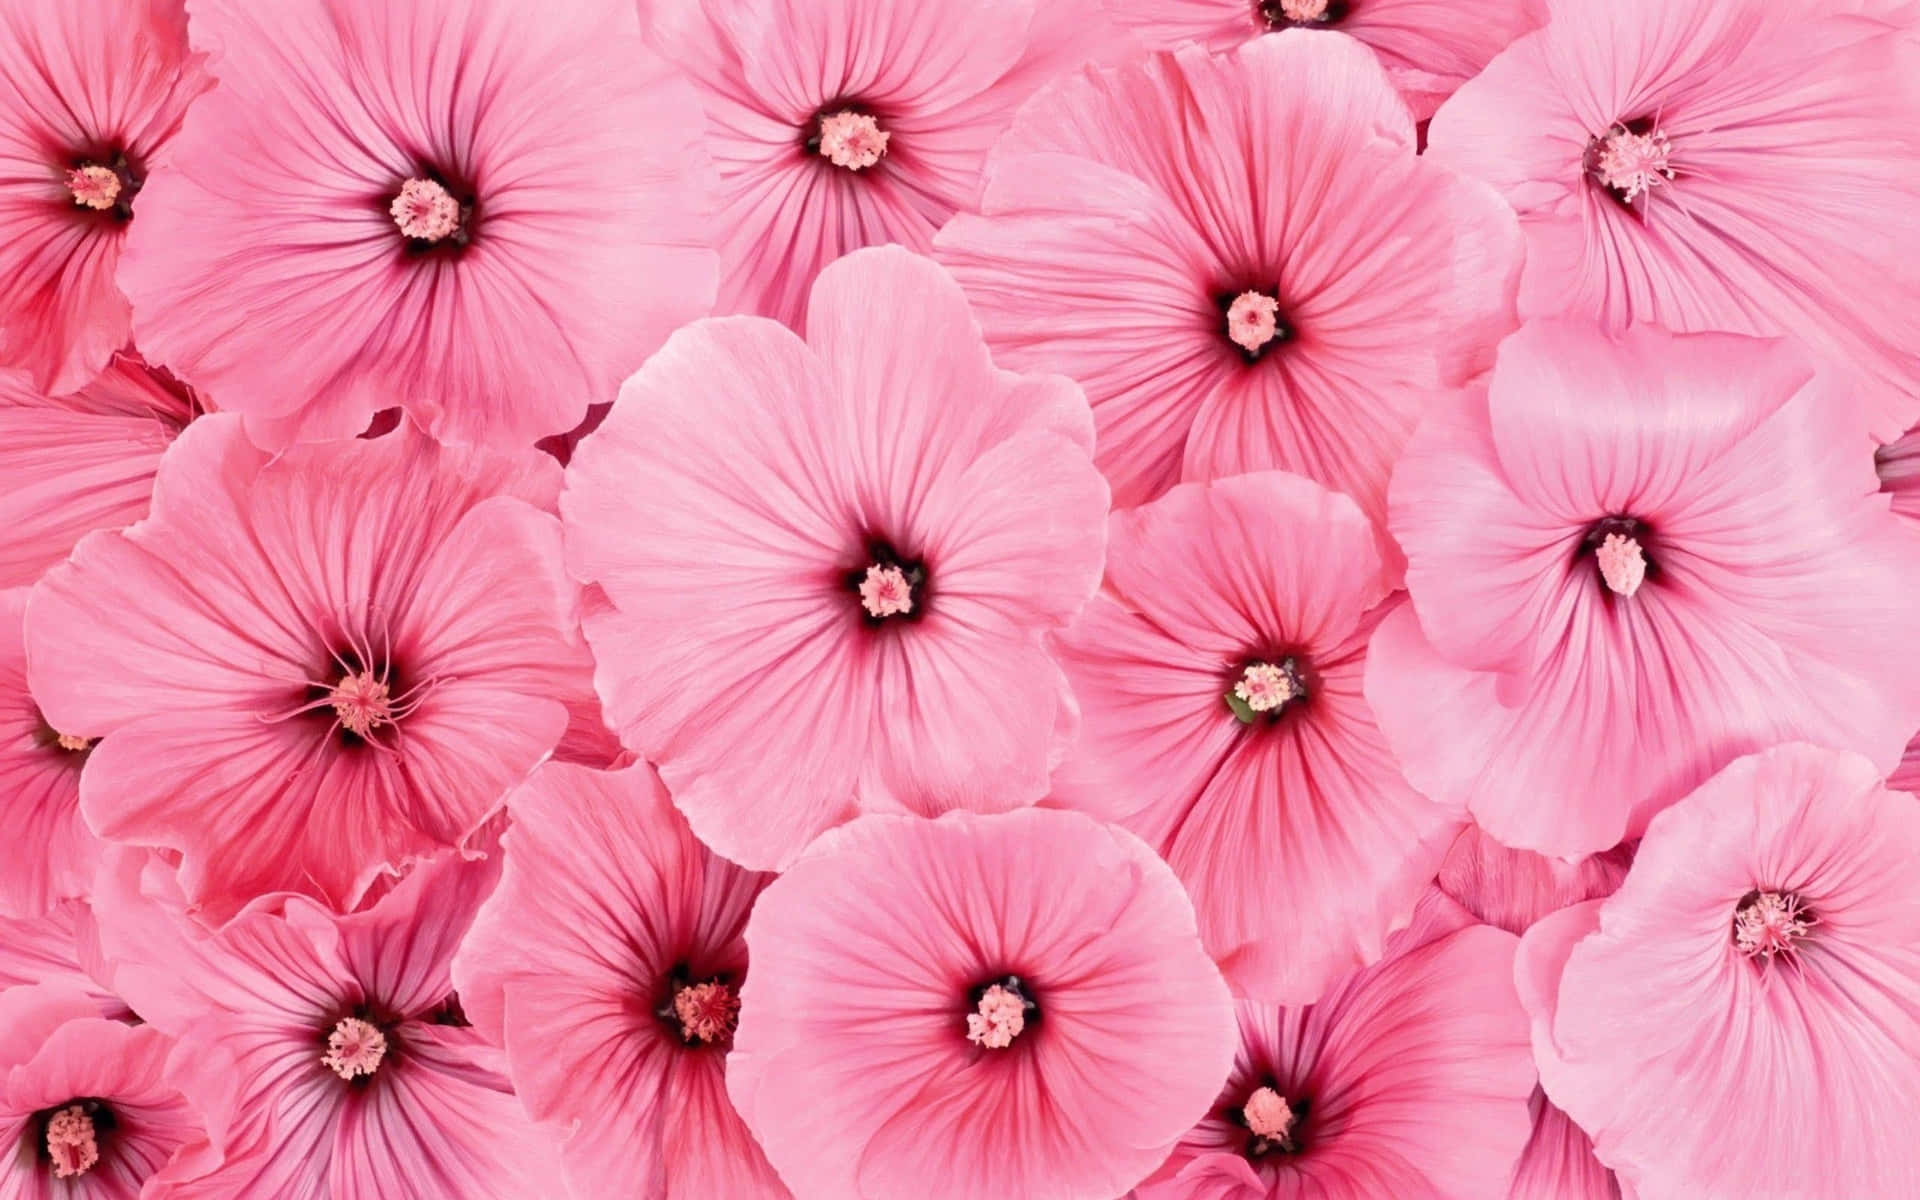 A beautiful pink floral background.